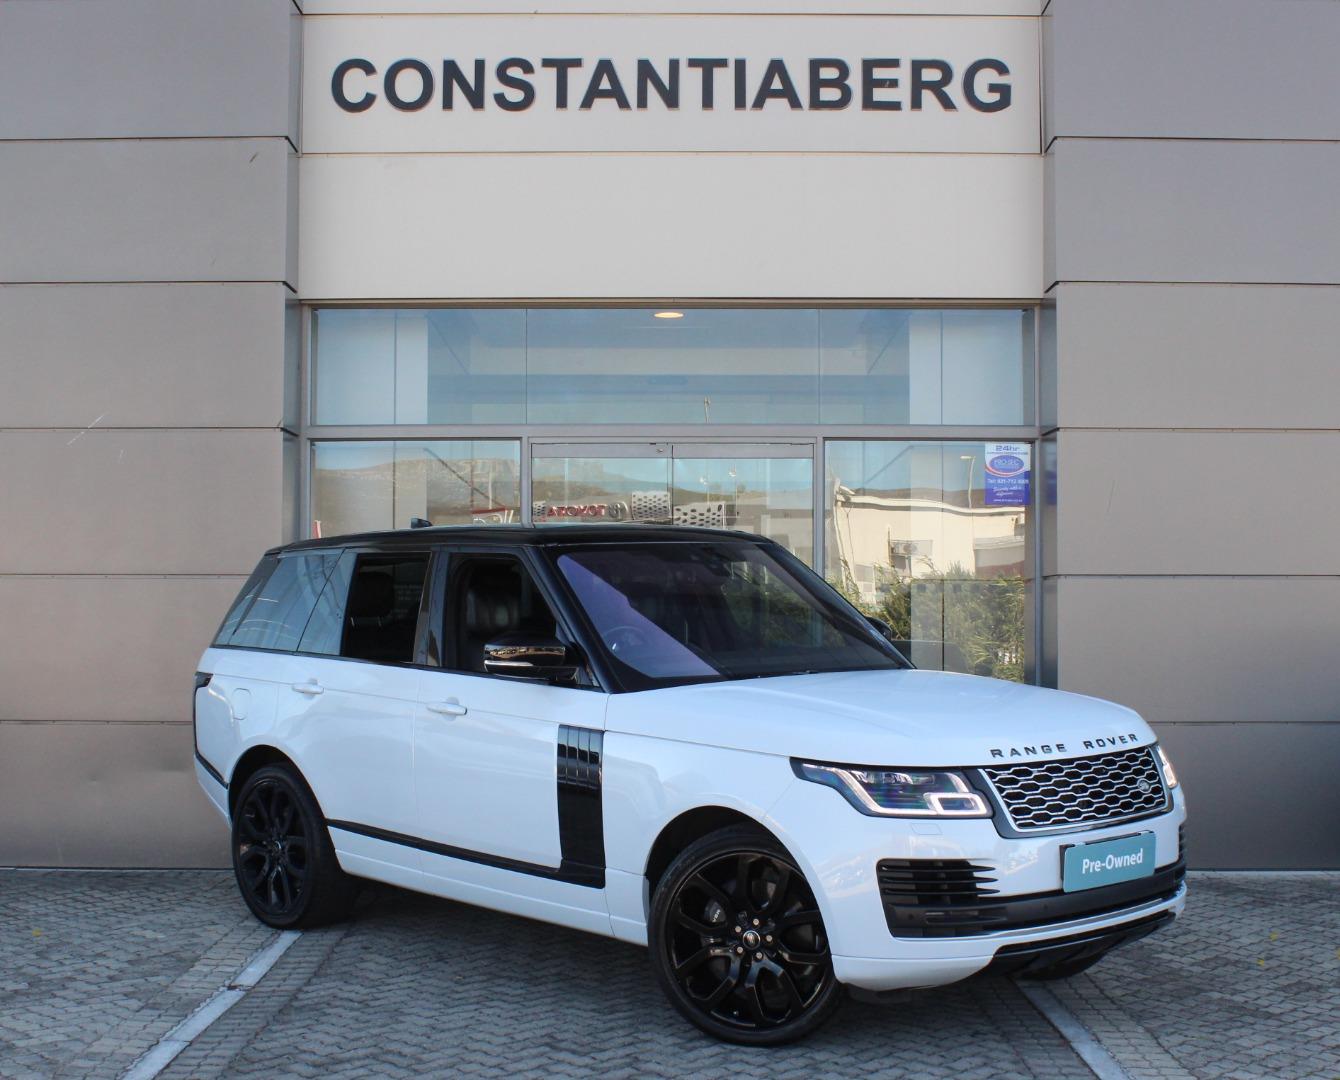 2018 Land Rover Range Rover  for sale - 899777